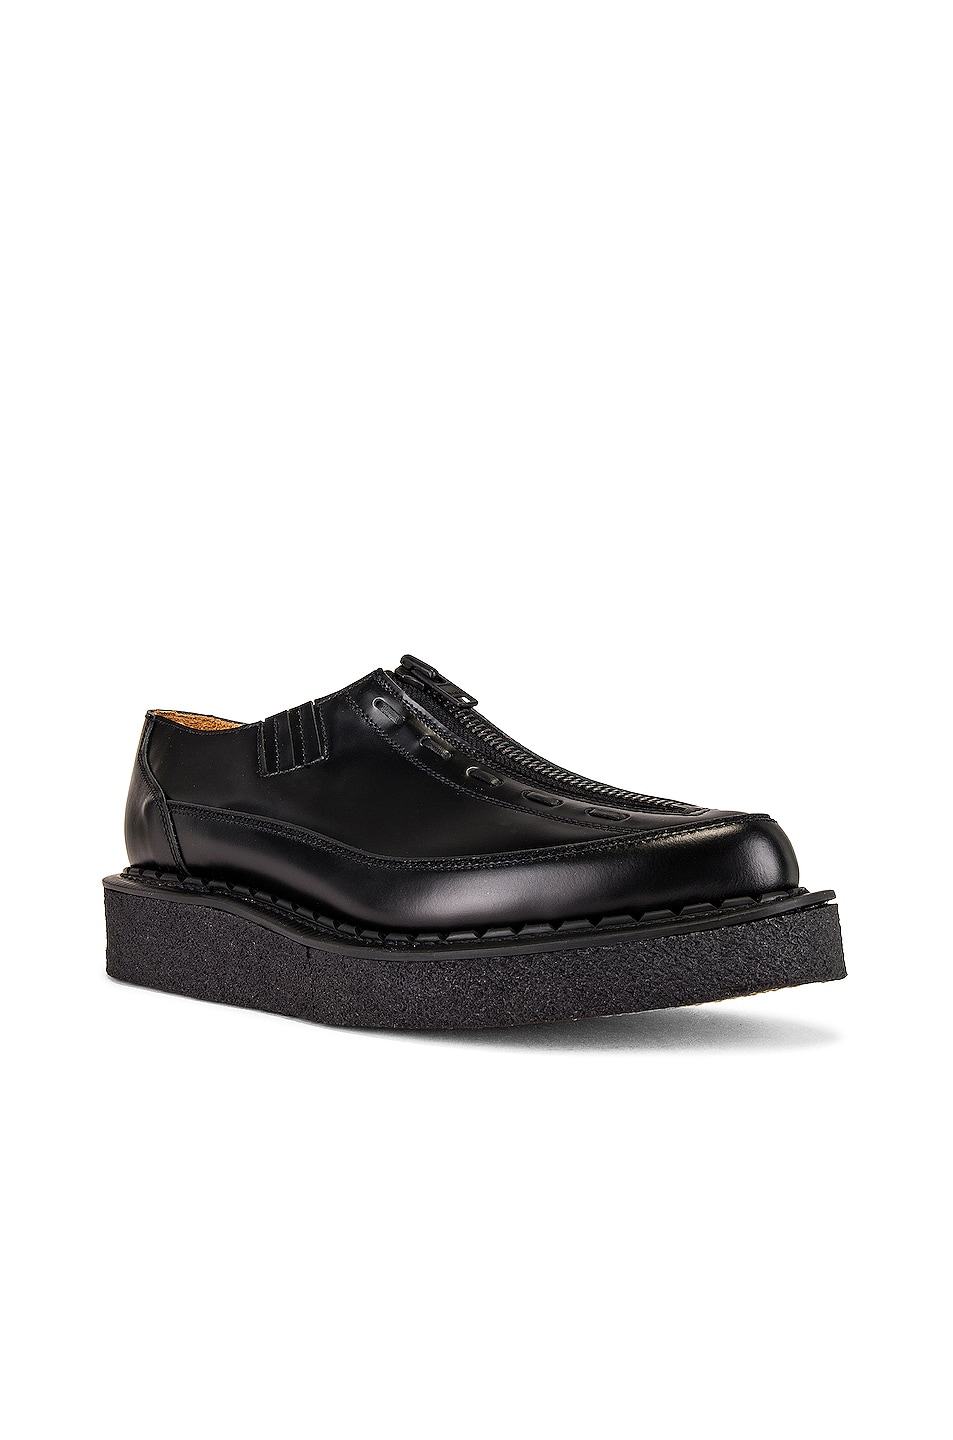 Image 1 of COMME des GARCONS Homme Plus George Cox Zip Slip-On Creeper in Black